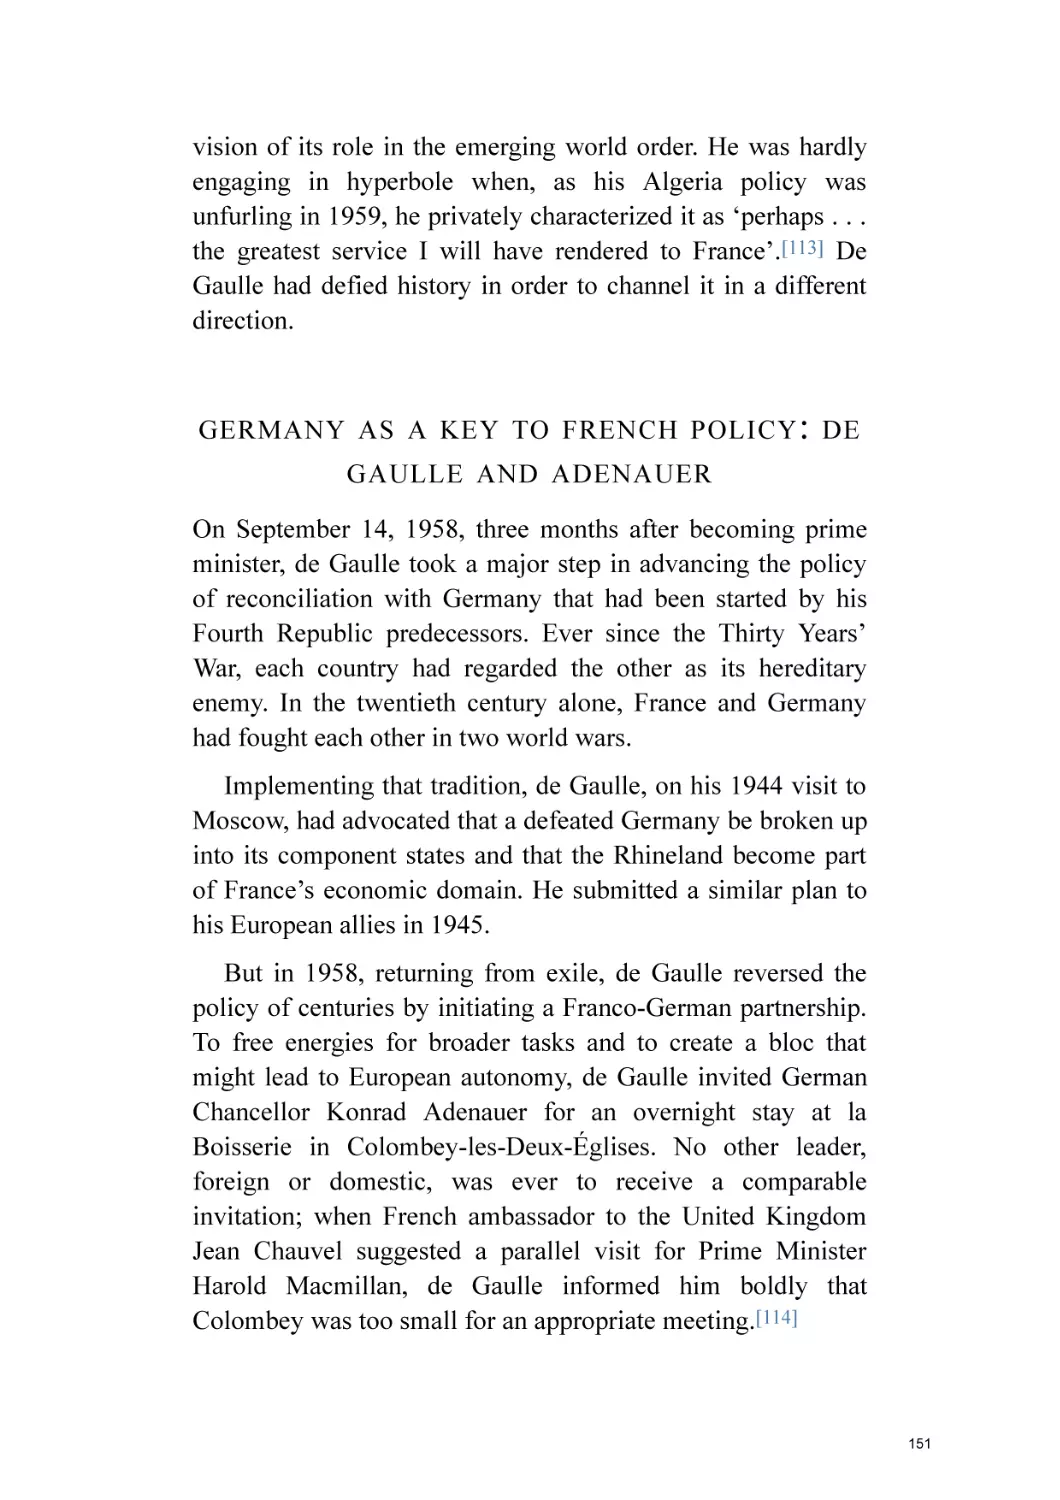 Germany as a Key to French Policy